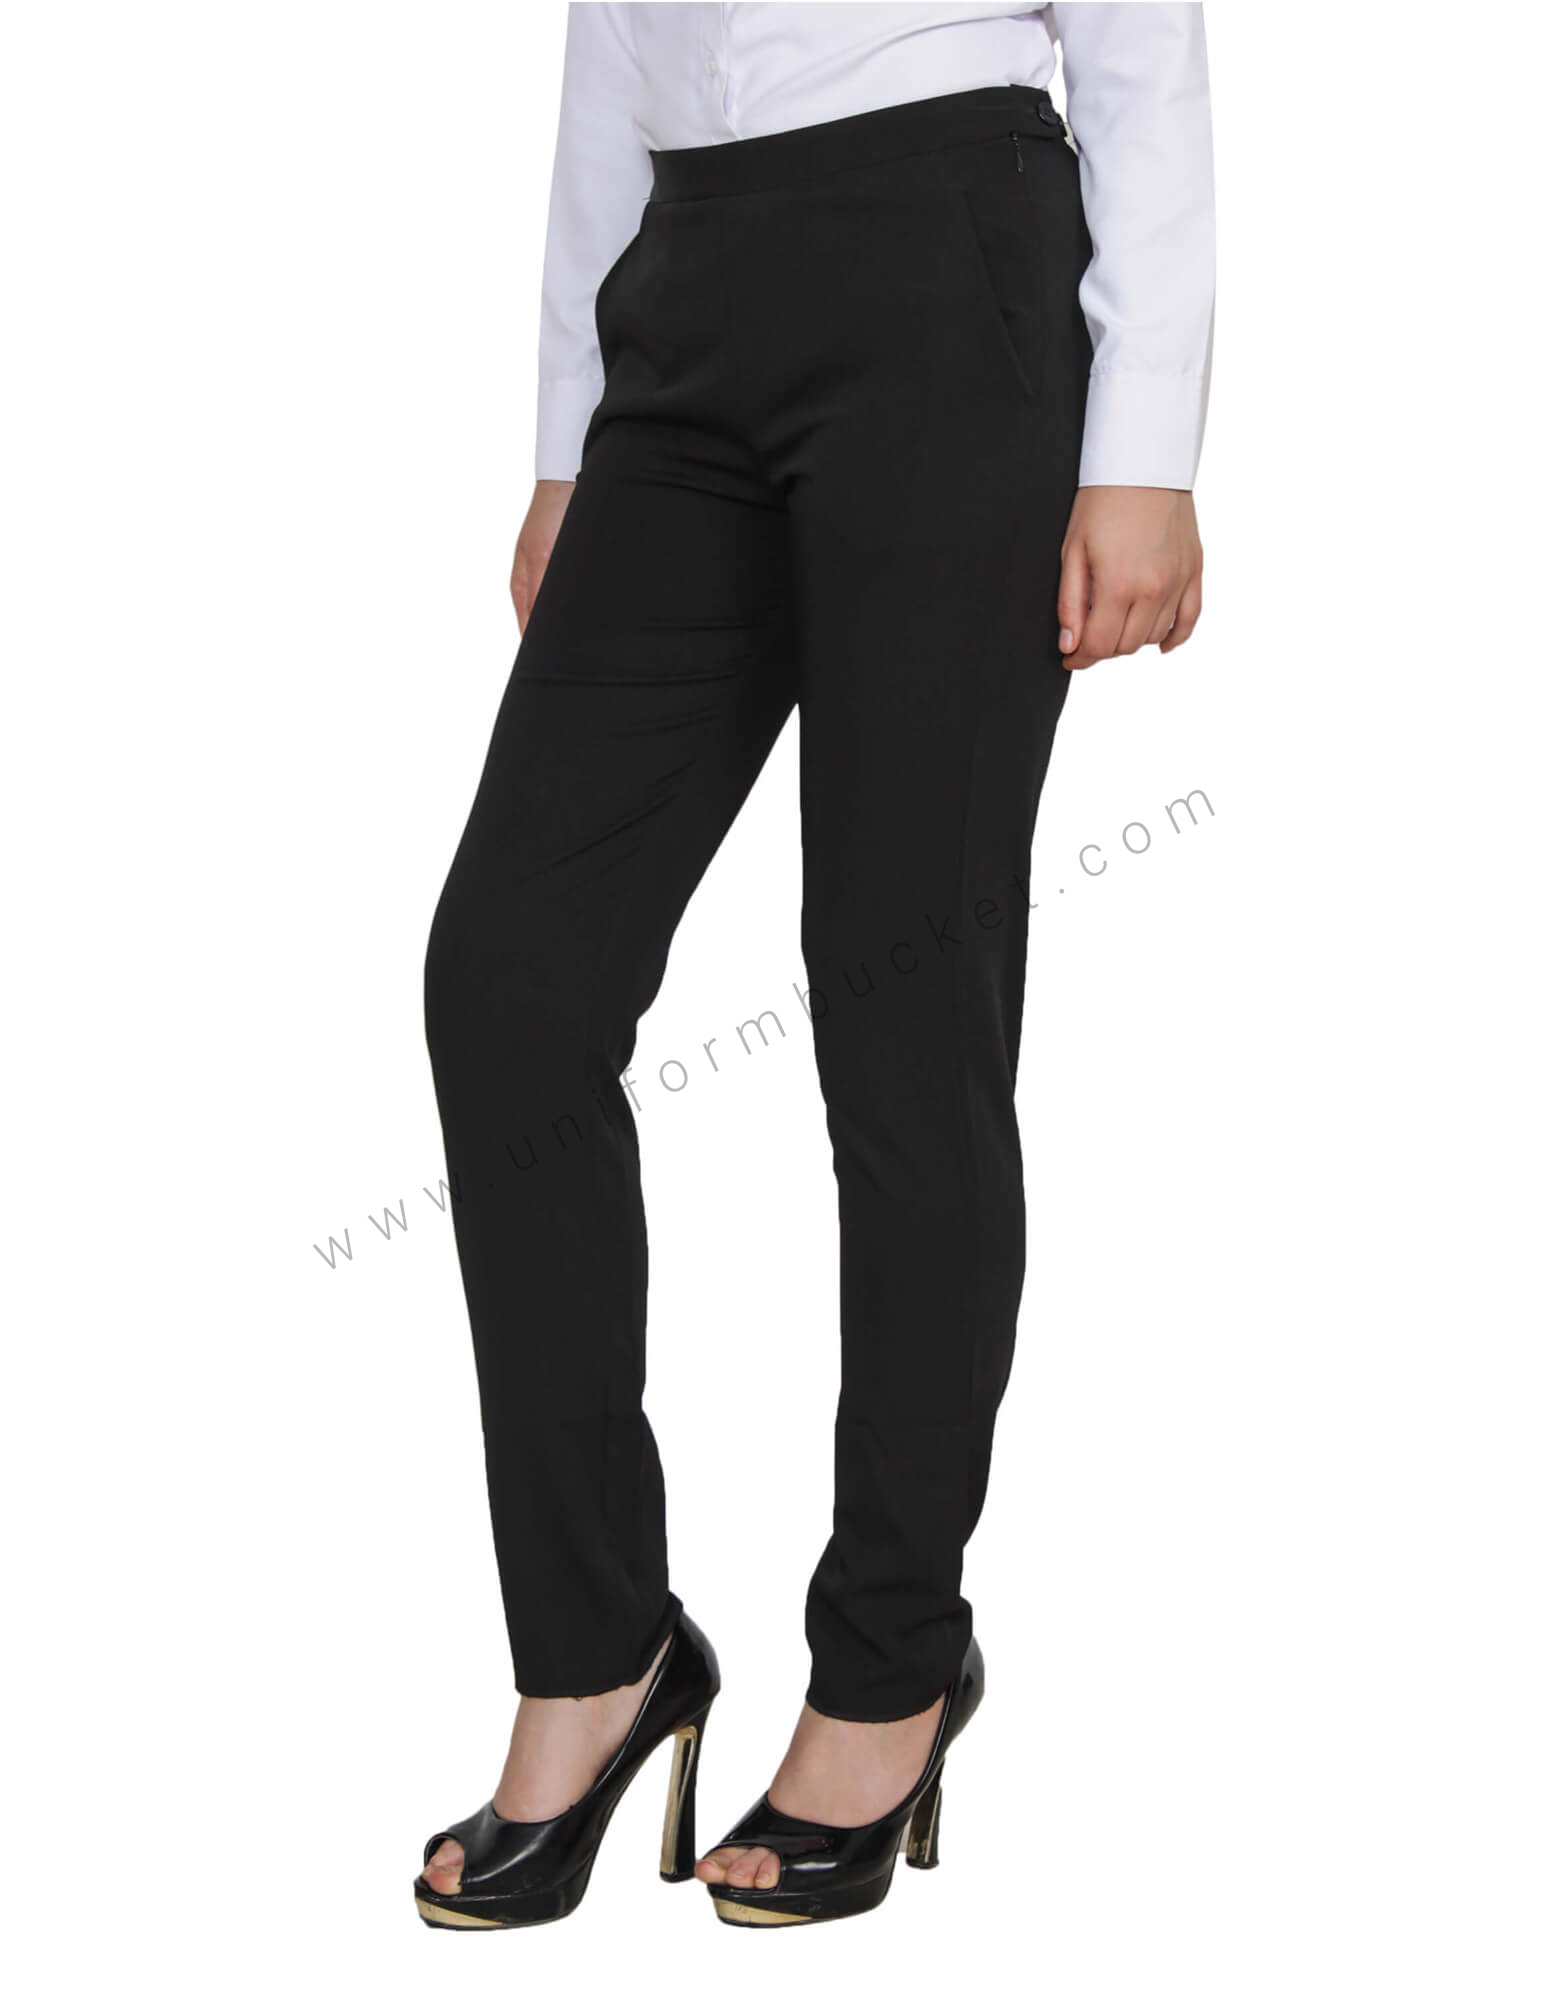 Black Formal Trouser With Adjuster Buttons